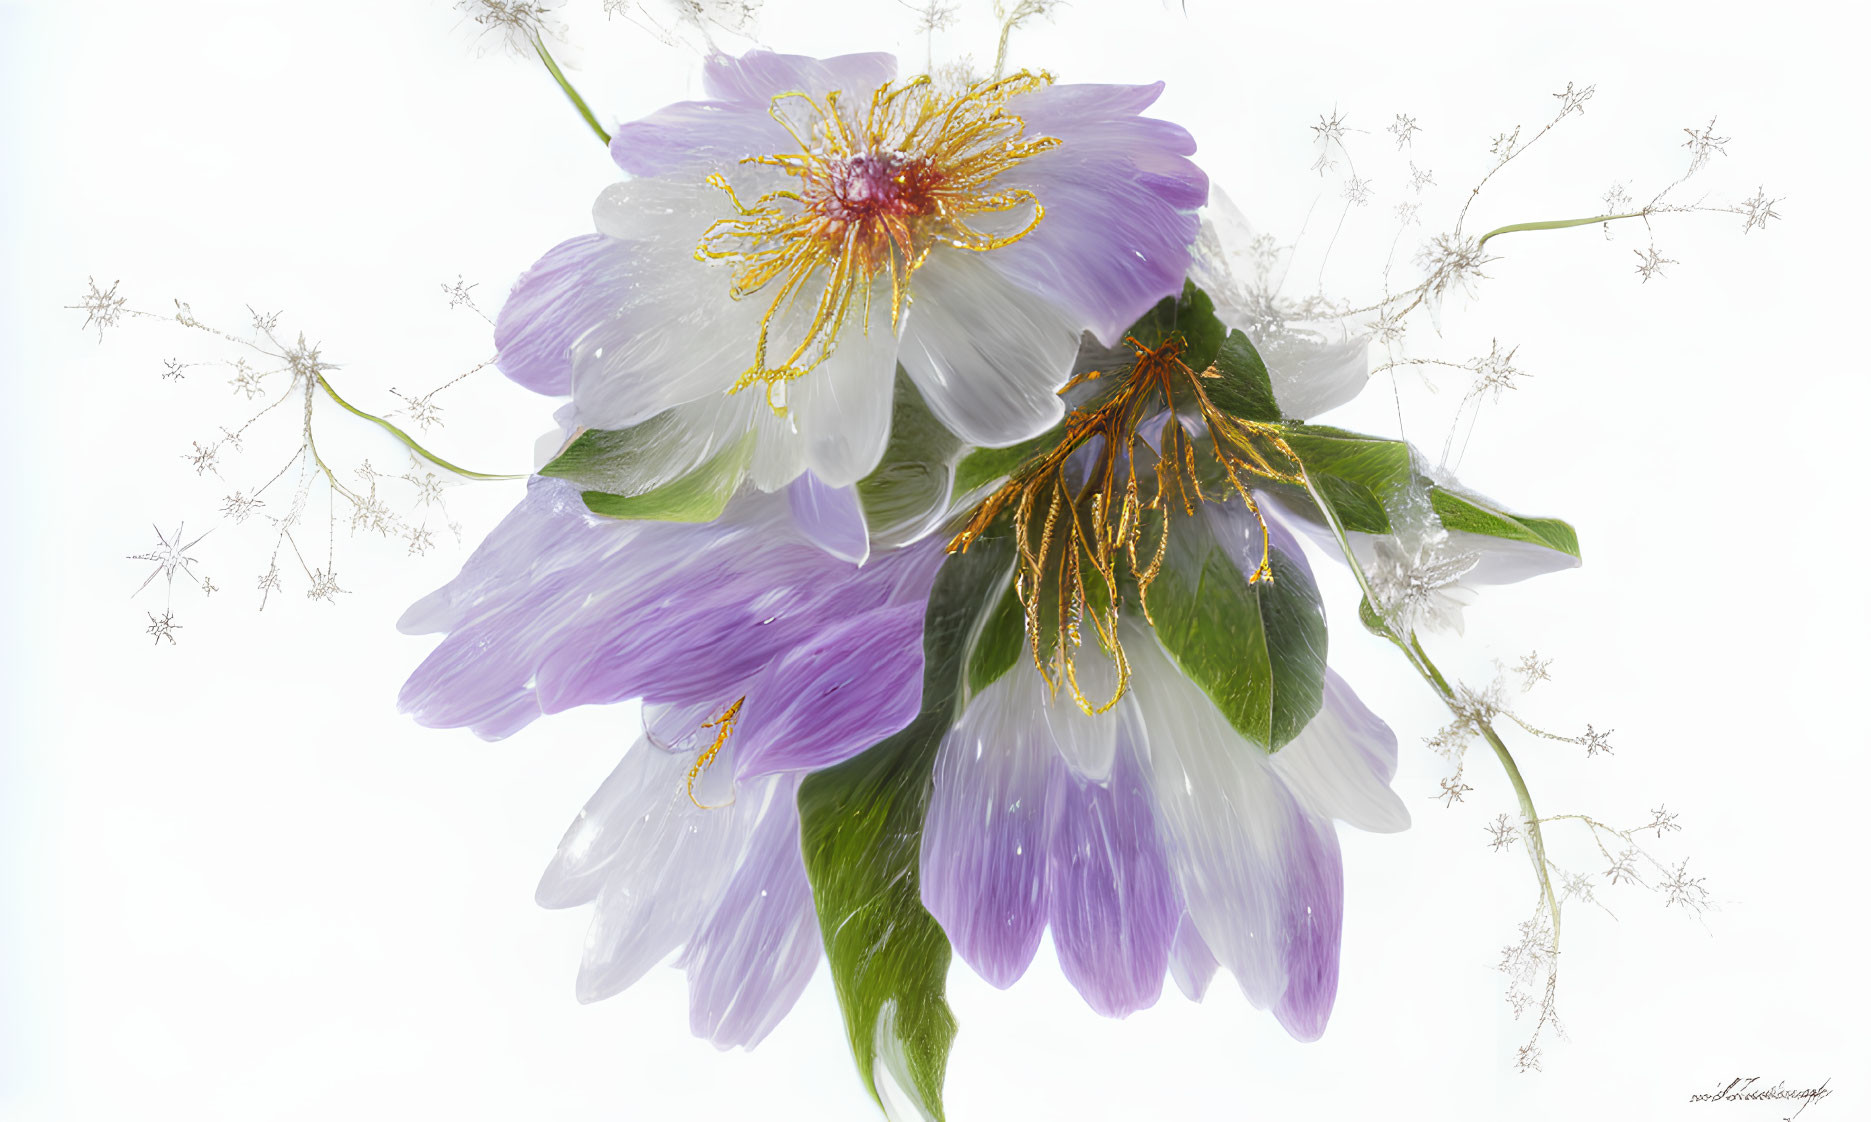 Translucent Purple and White Flowers with Golden Stamens on White Background